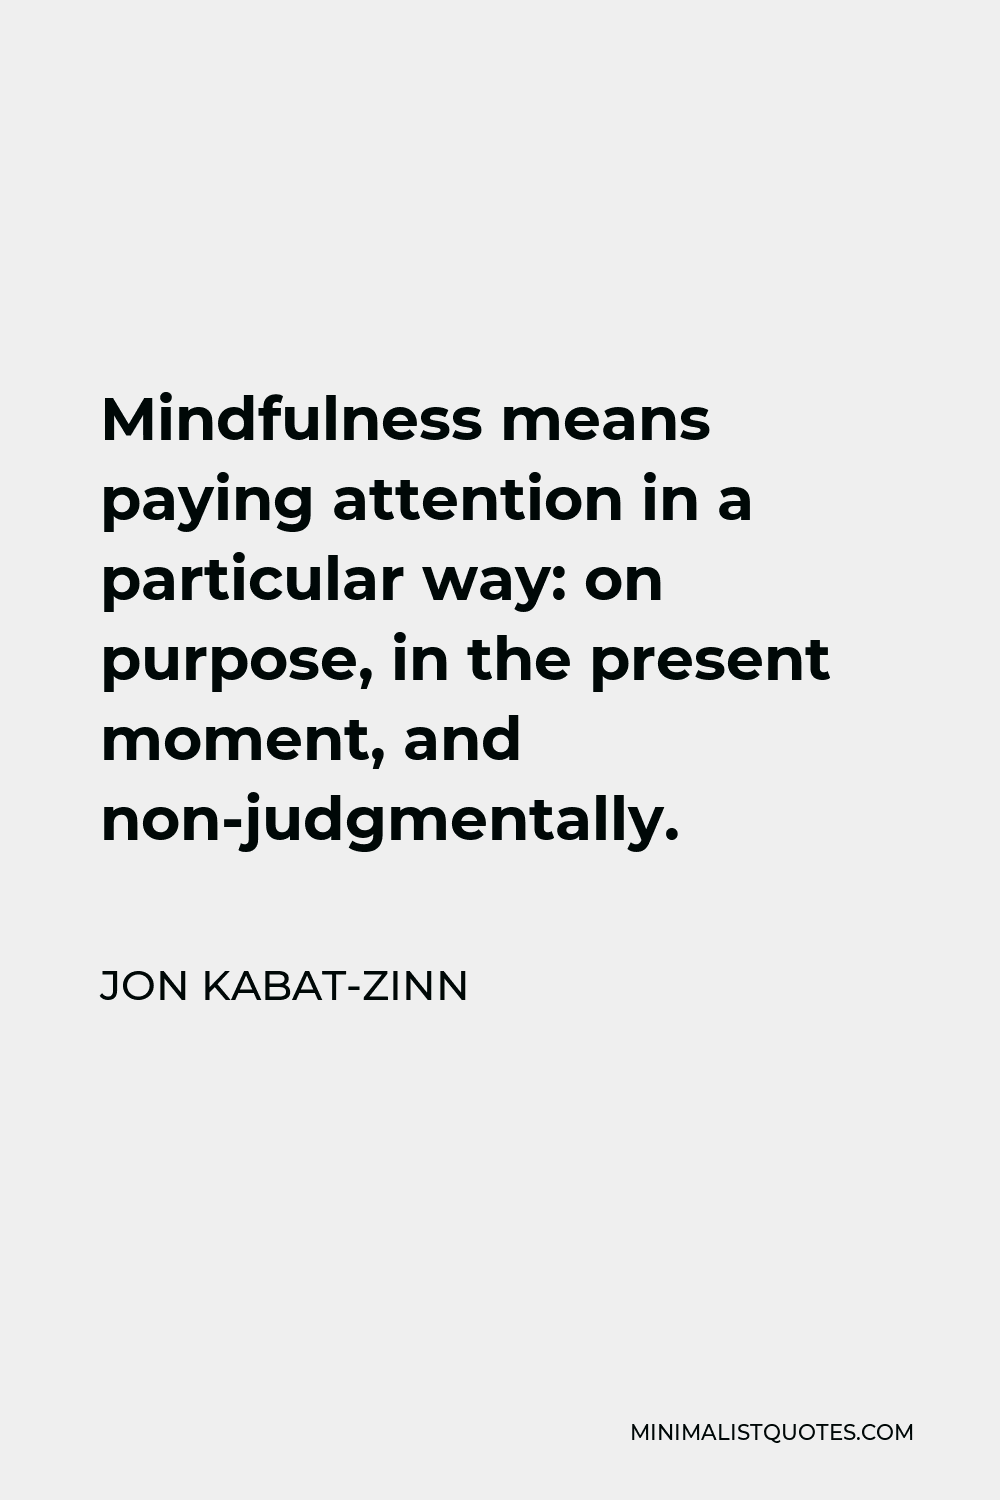 Jon Kabat-Zinn Quote - Mindfulness means paying attention in a particular way: on purpose, in the present moment, and non-judgmentally.